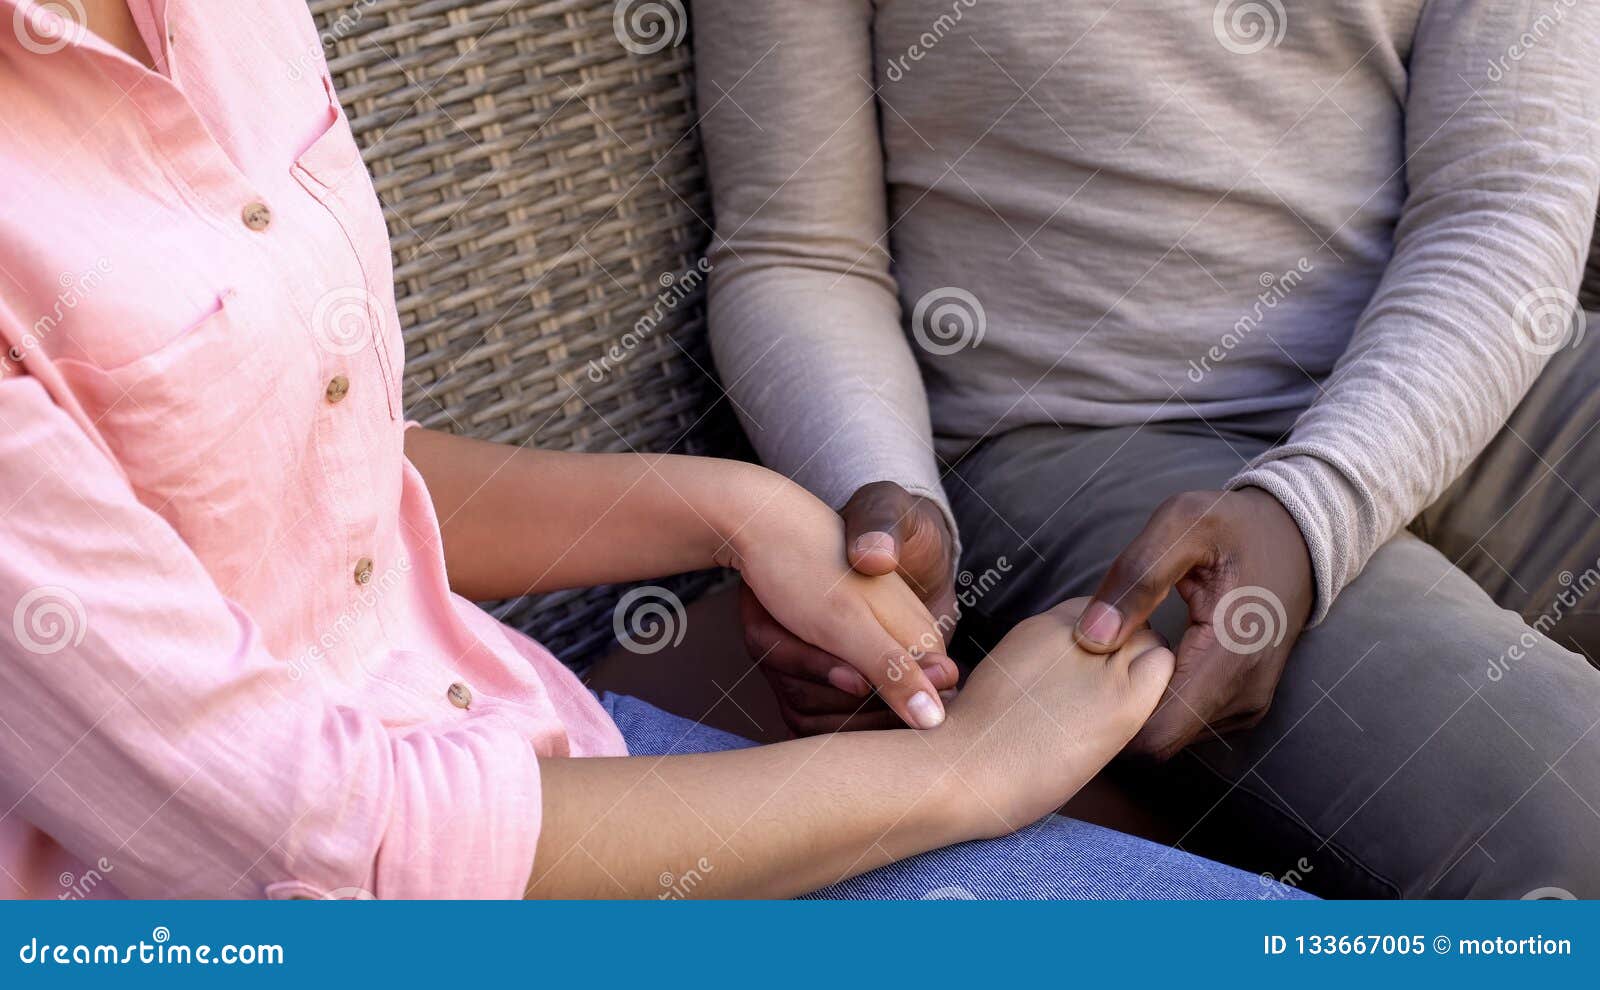 american loving couple holding hands sitting on bench, trusting relationships